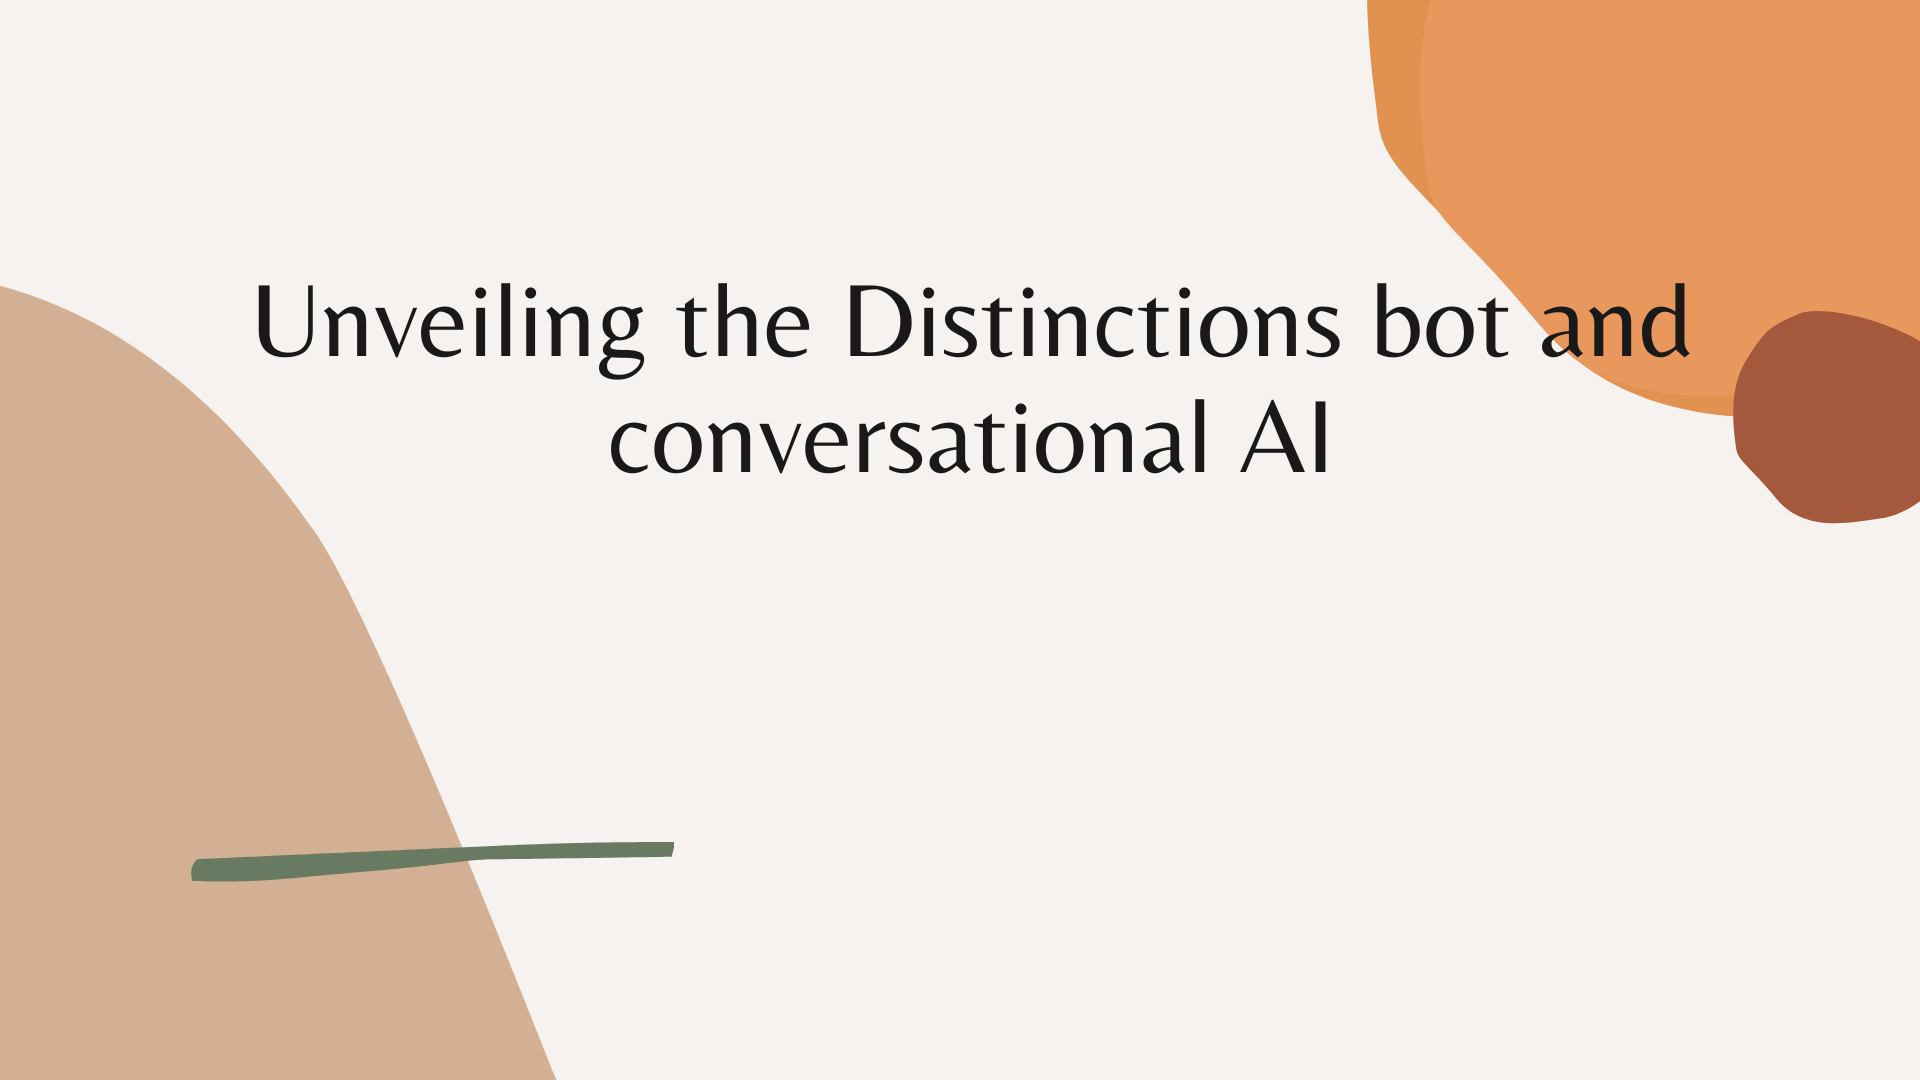 Unveiling-the-Distinctions-bot-and-conversational-AI.